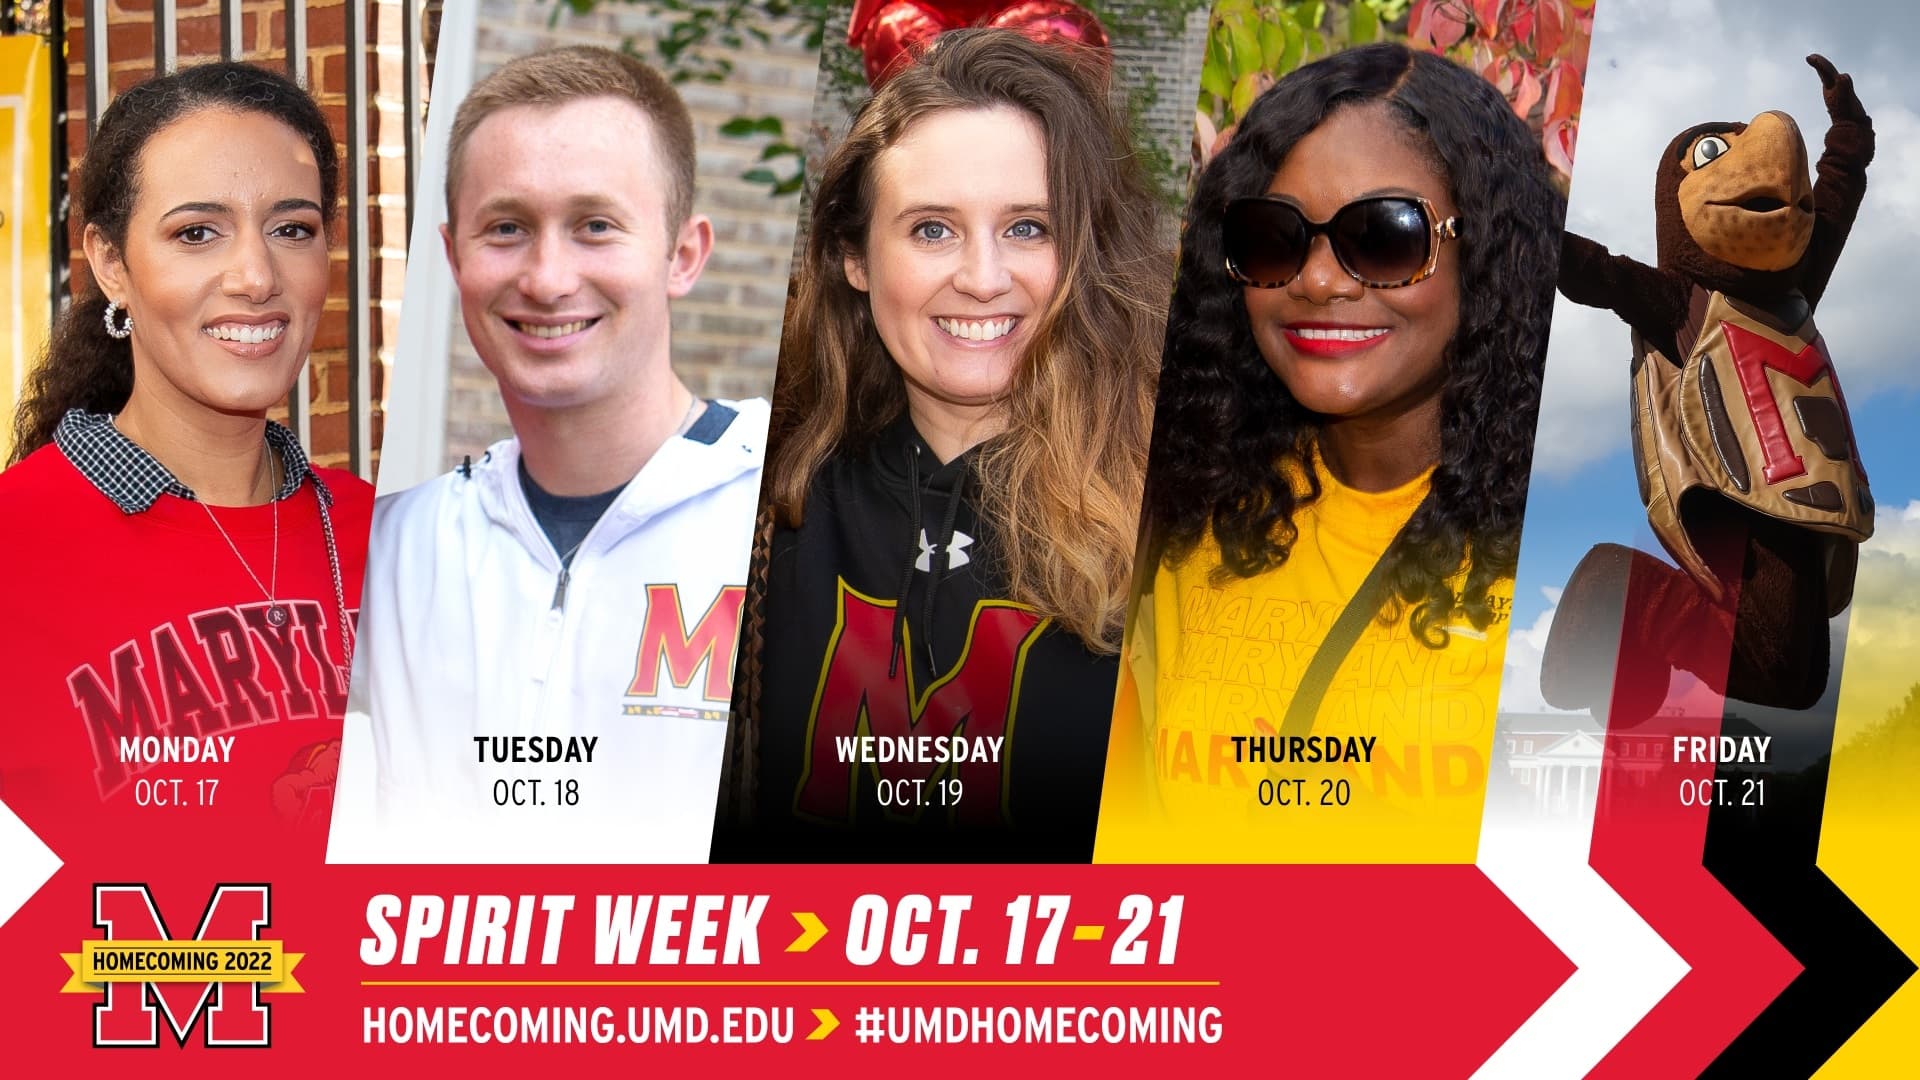 Banner Graphic of 5 portraits for each day of spirit week above the text: Spirit Week: October 17 to October 21, #UMDHomecoming, Homecoming 2022, University of Maryland